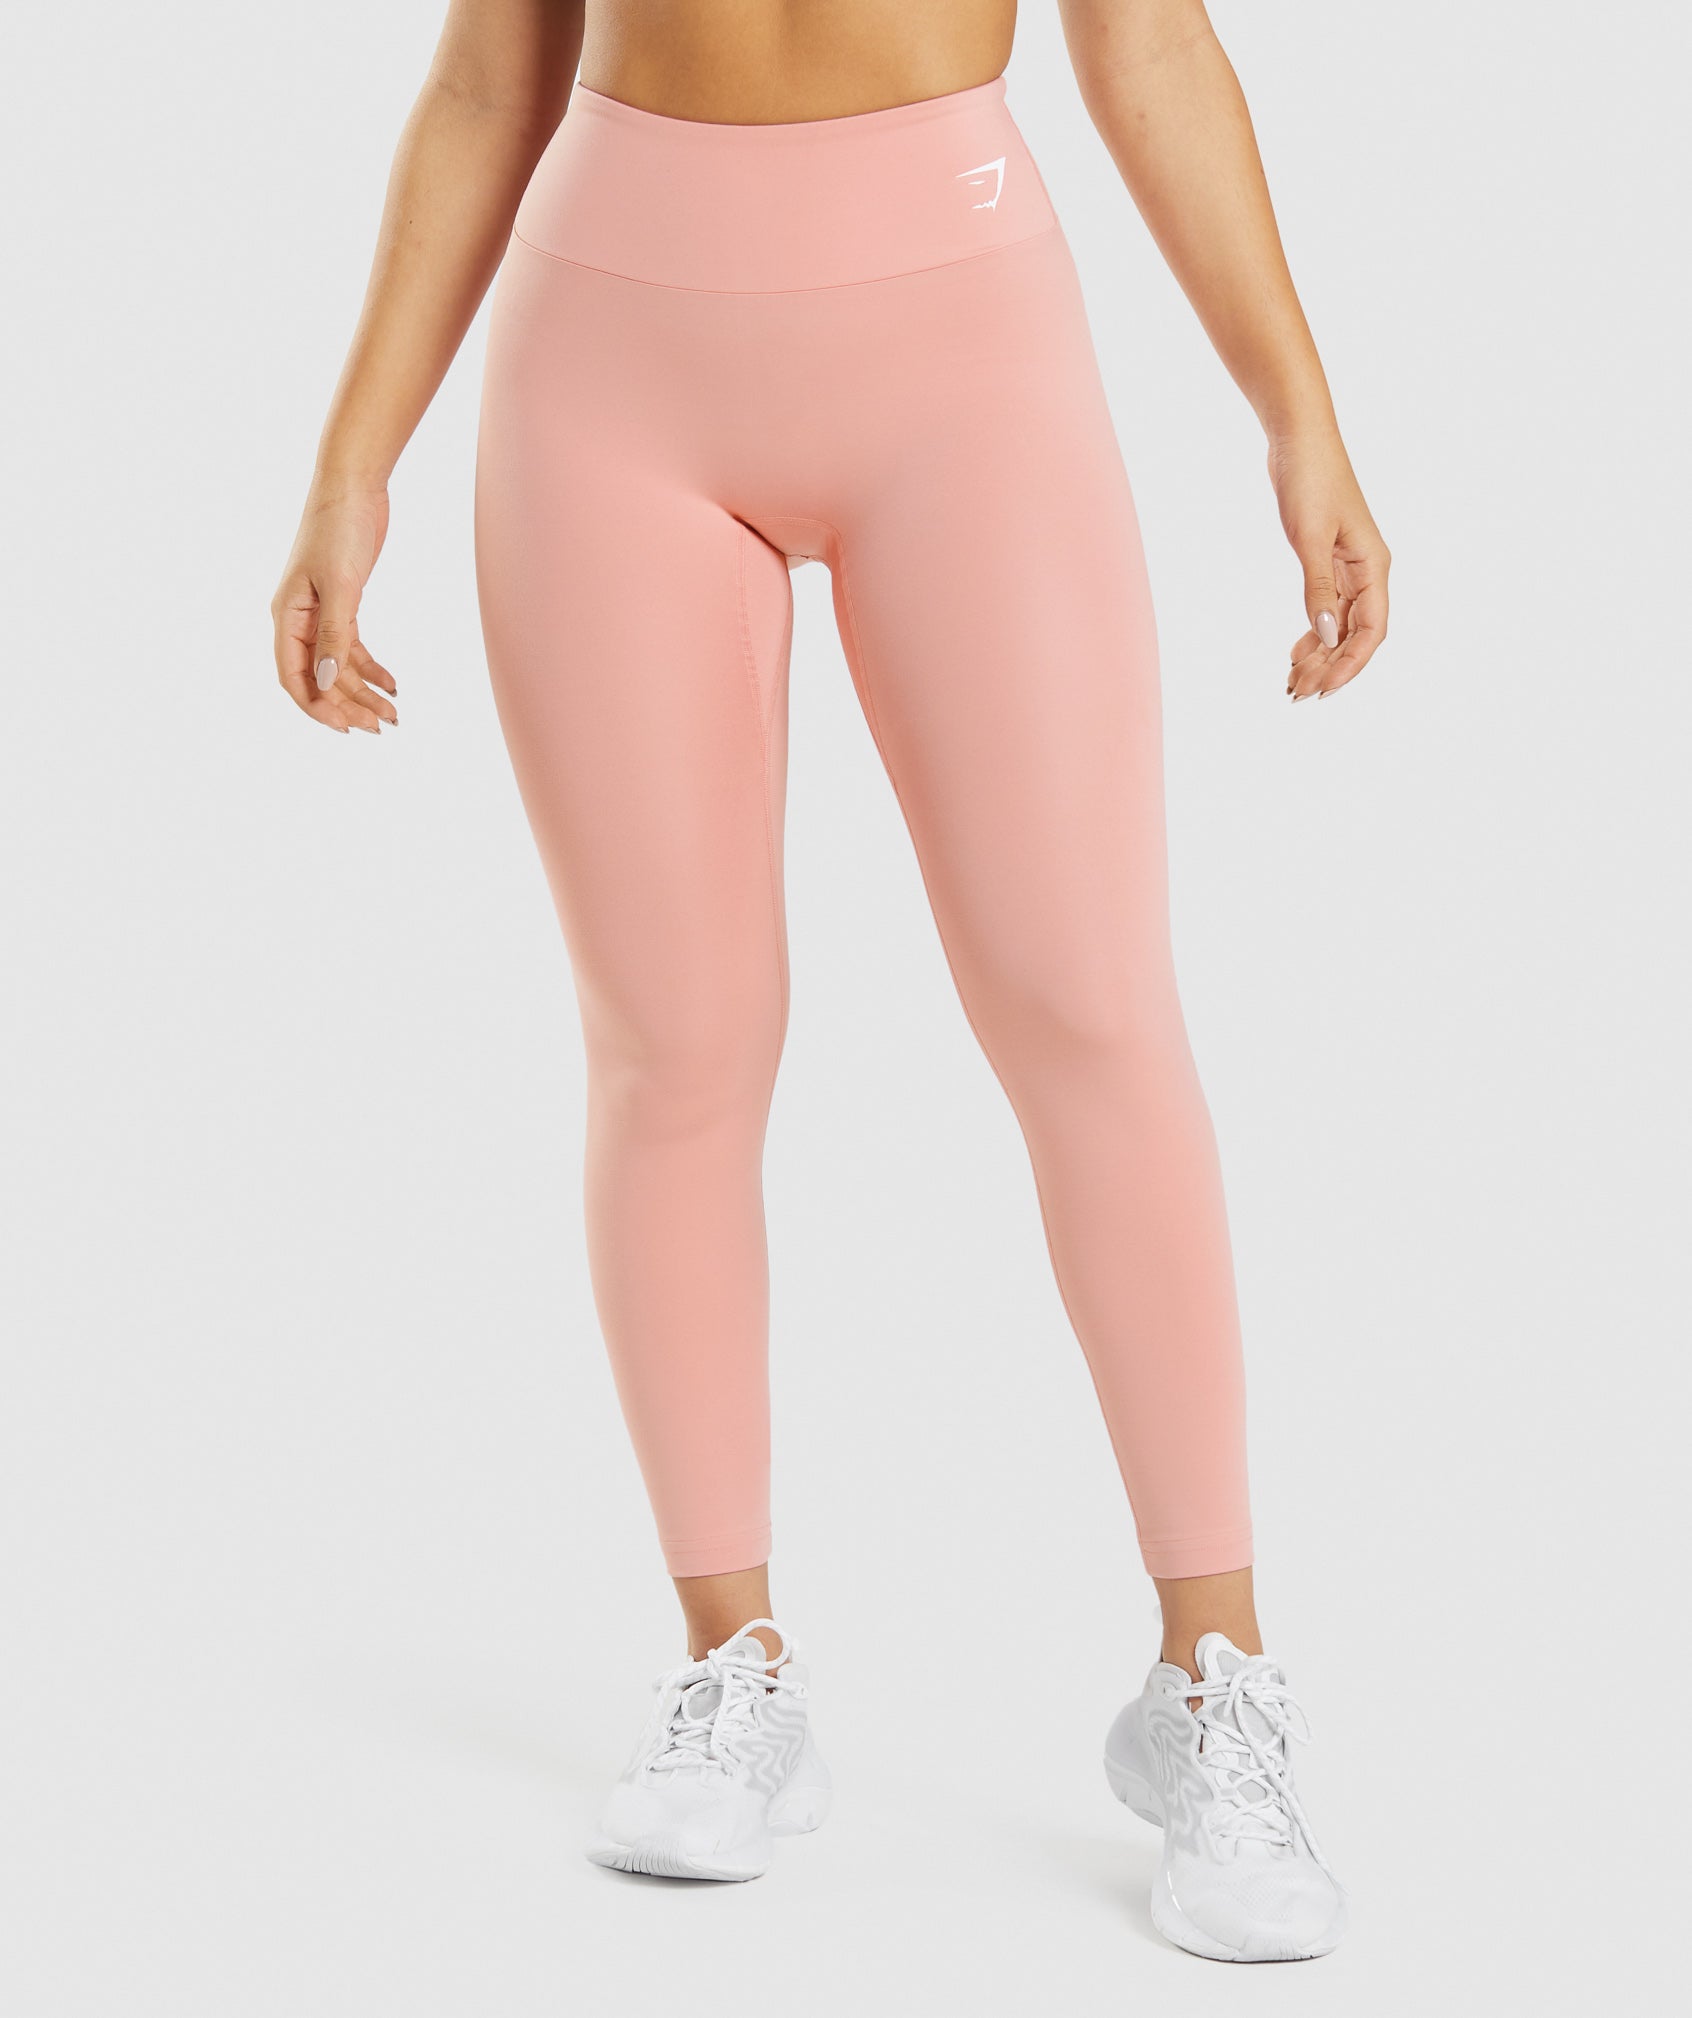 Pin by RLQ on Gymshark  Workout leggings, Workout clothes, Sport